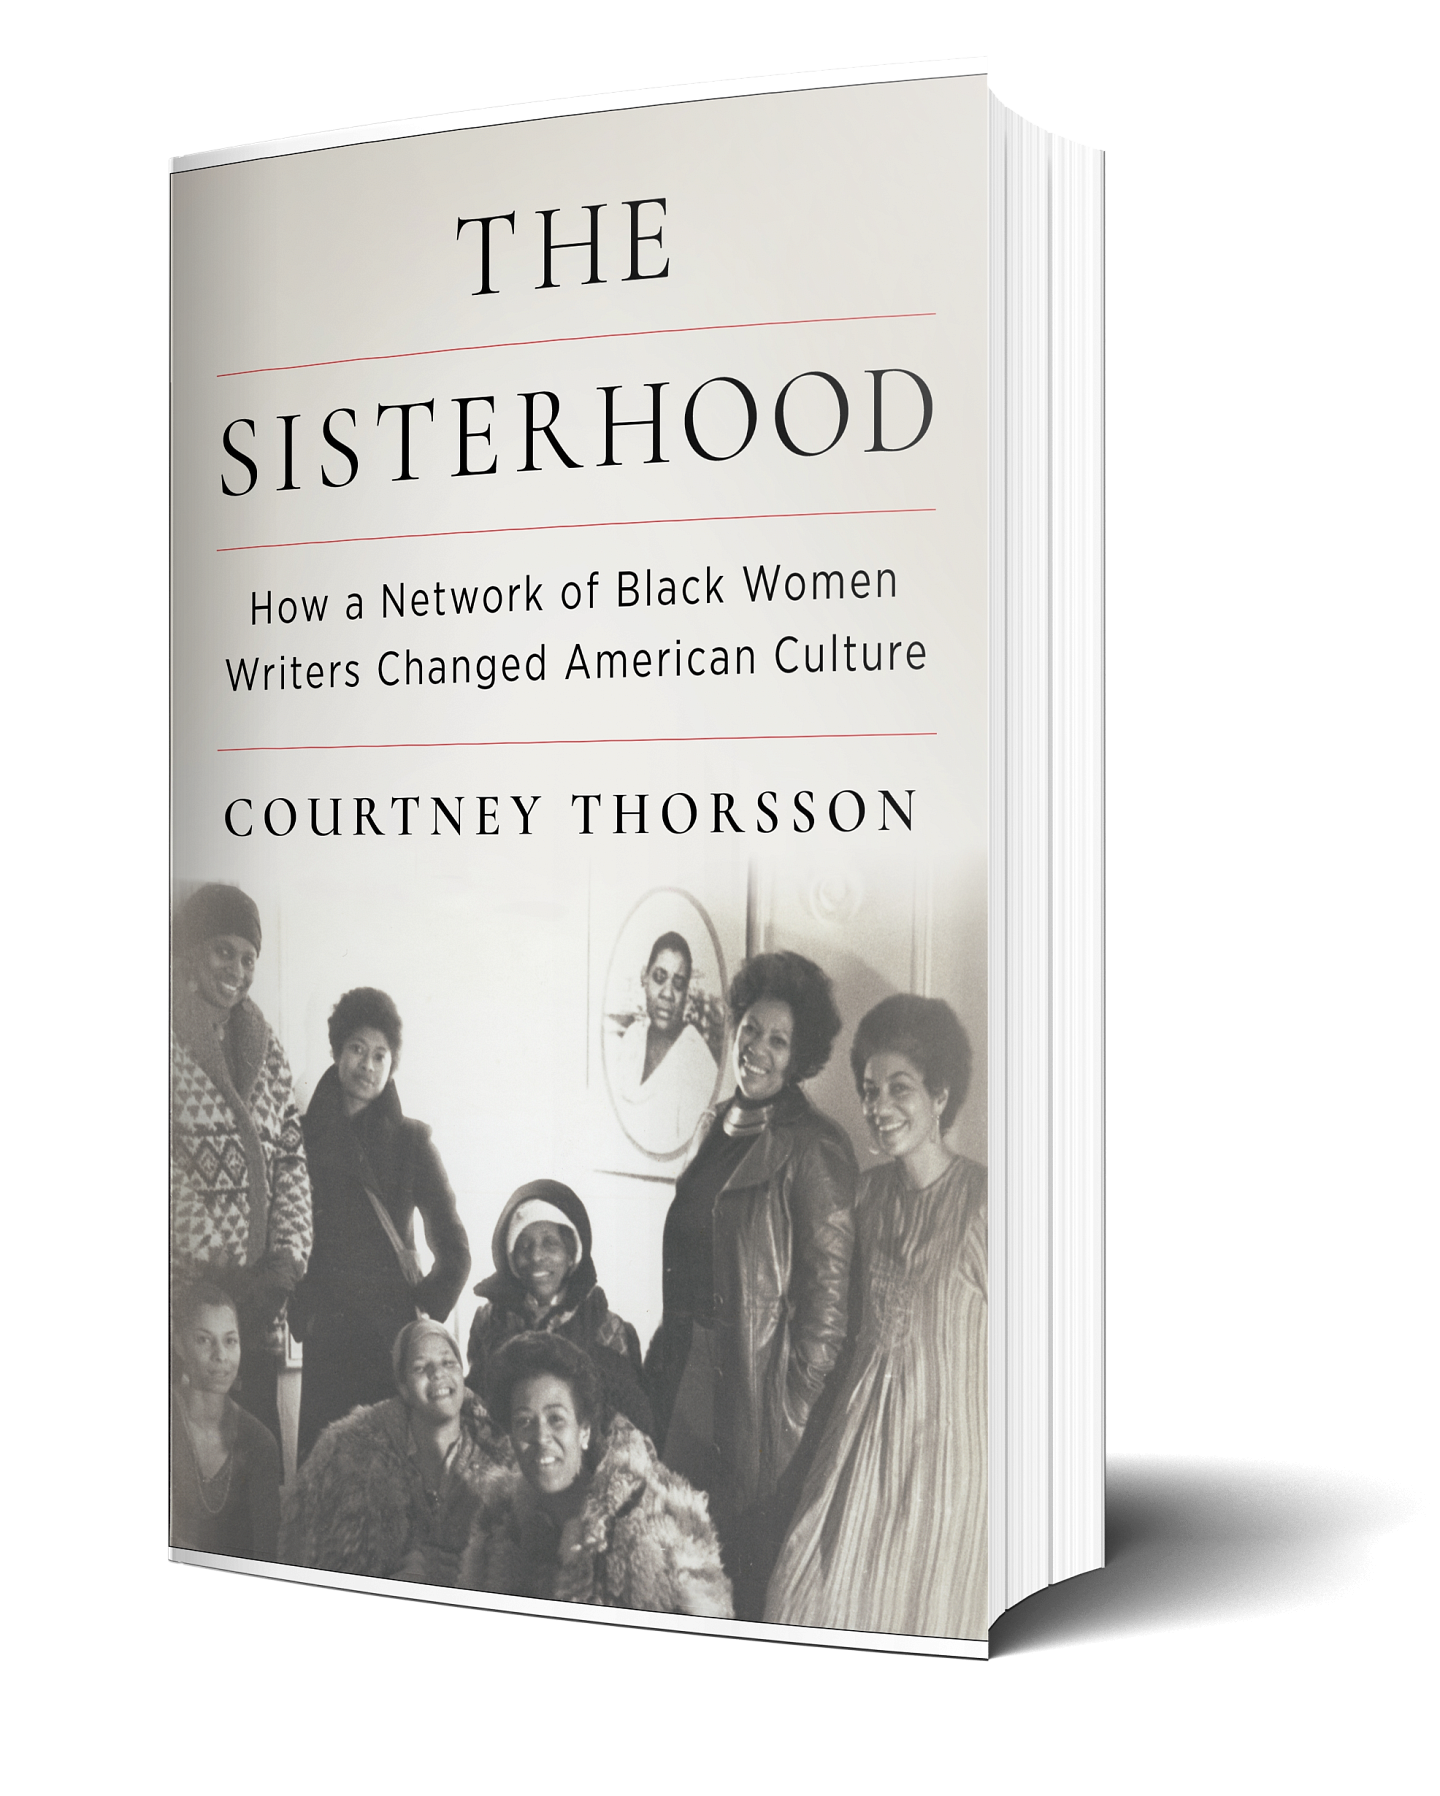 The Sisterhood: How a Network of Black Women Writers Changed American Culture